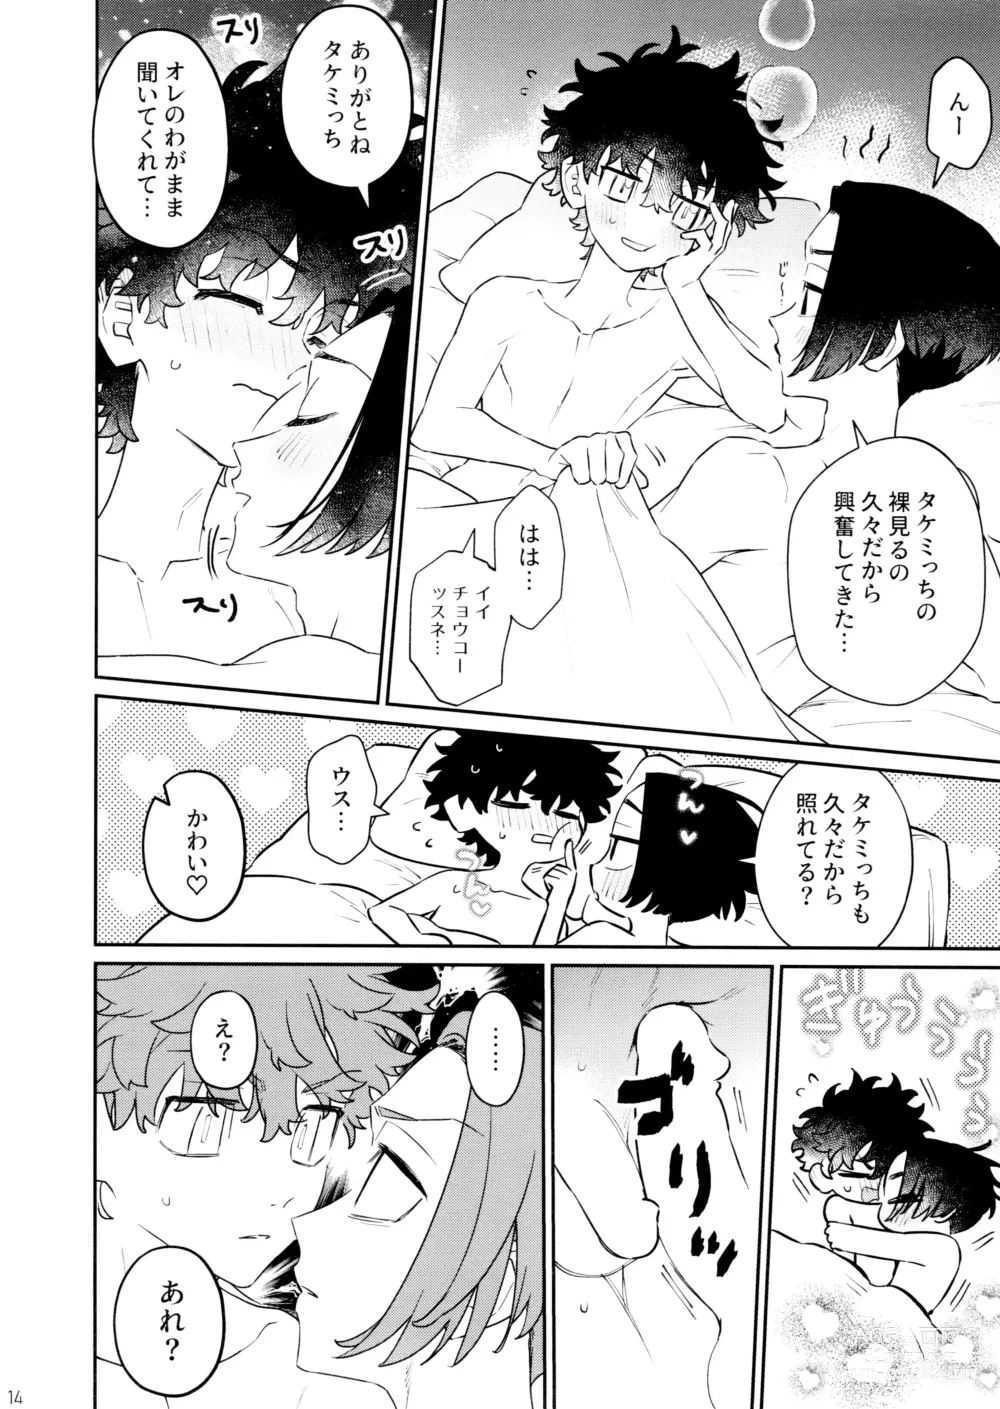 Page 14 of doujinshi CHIPPY GAME